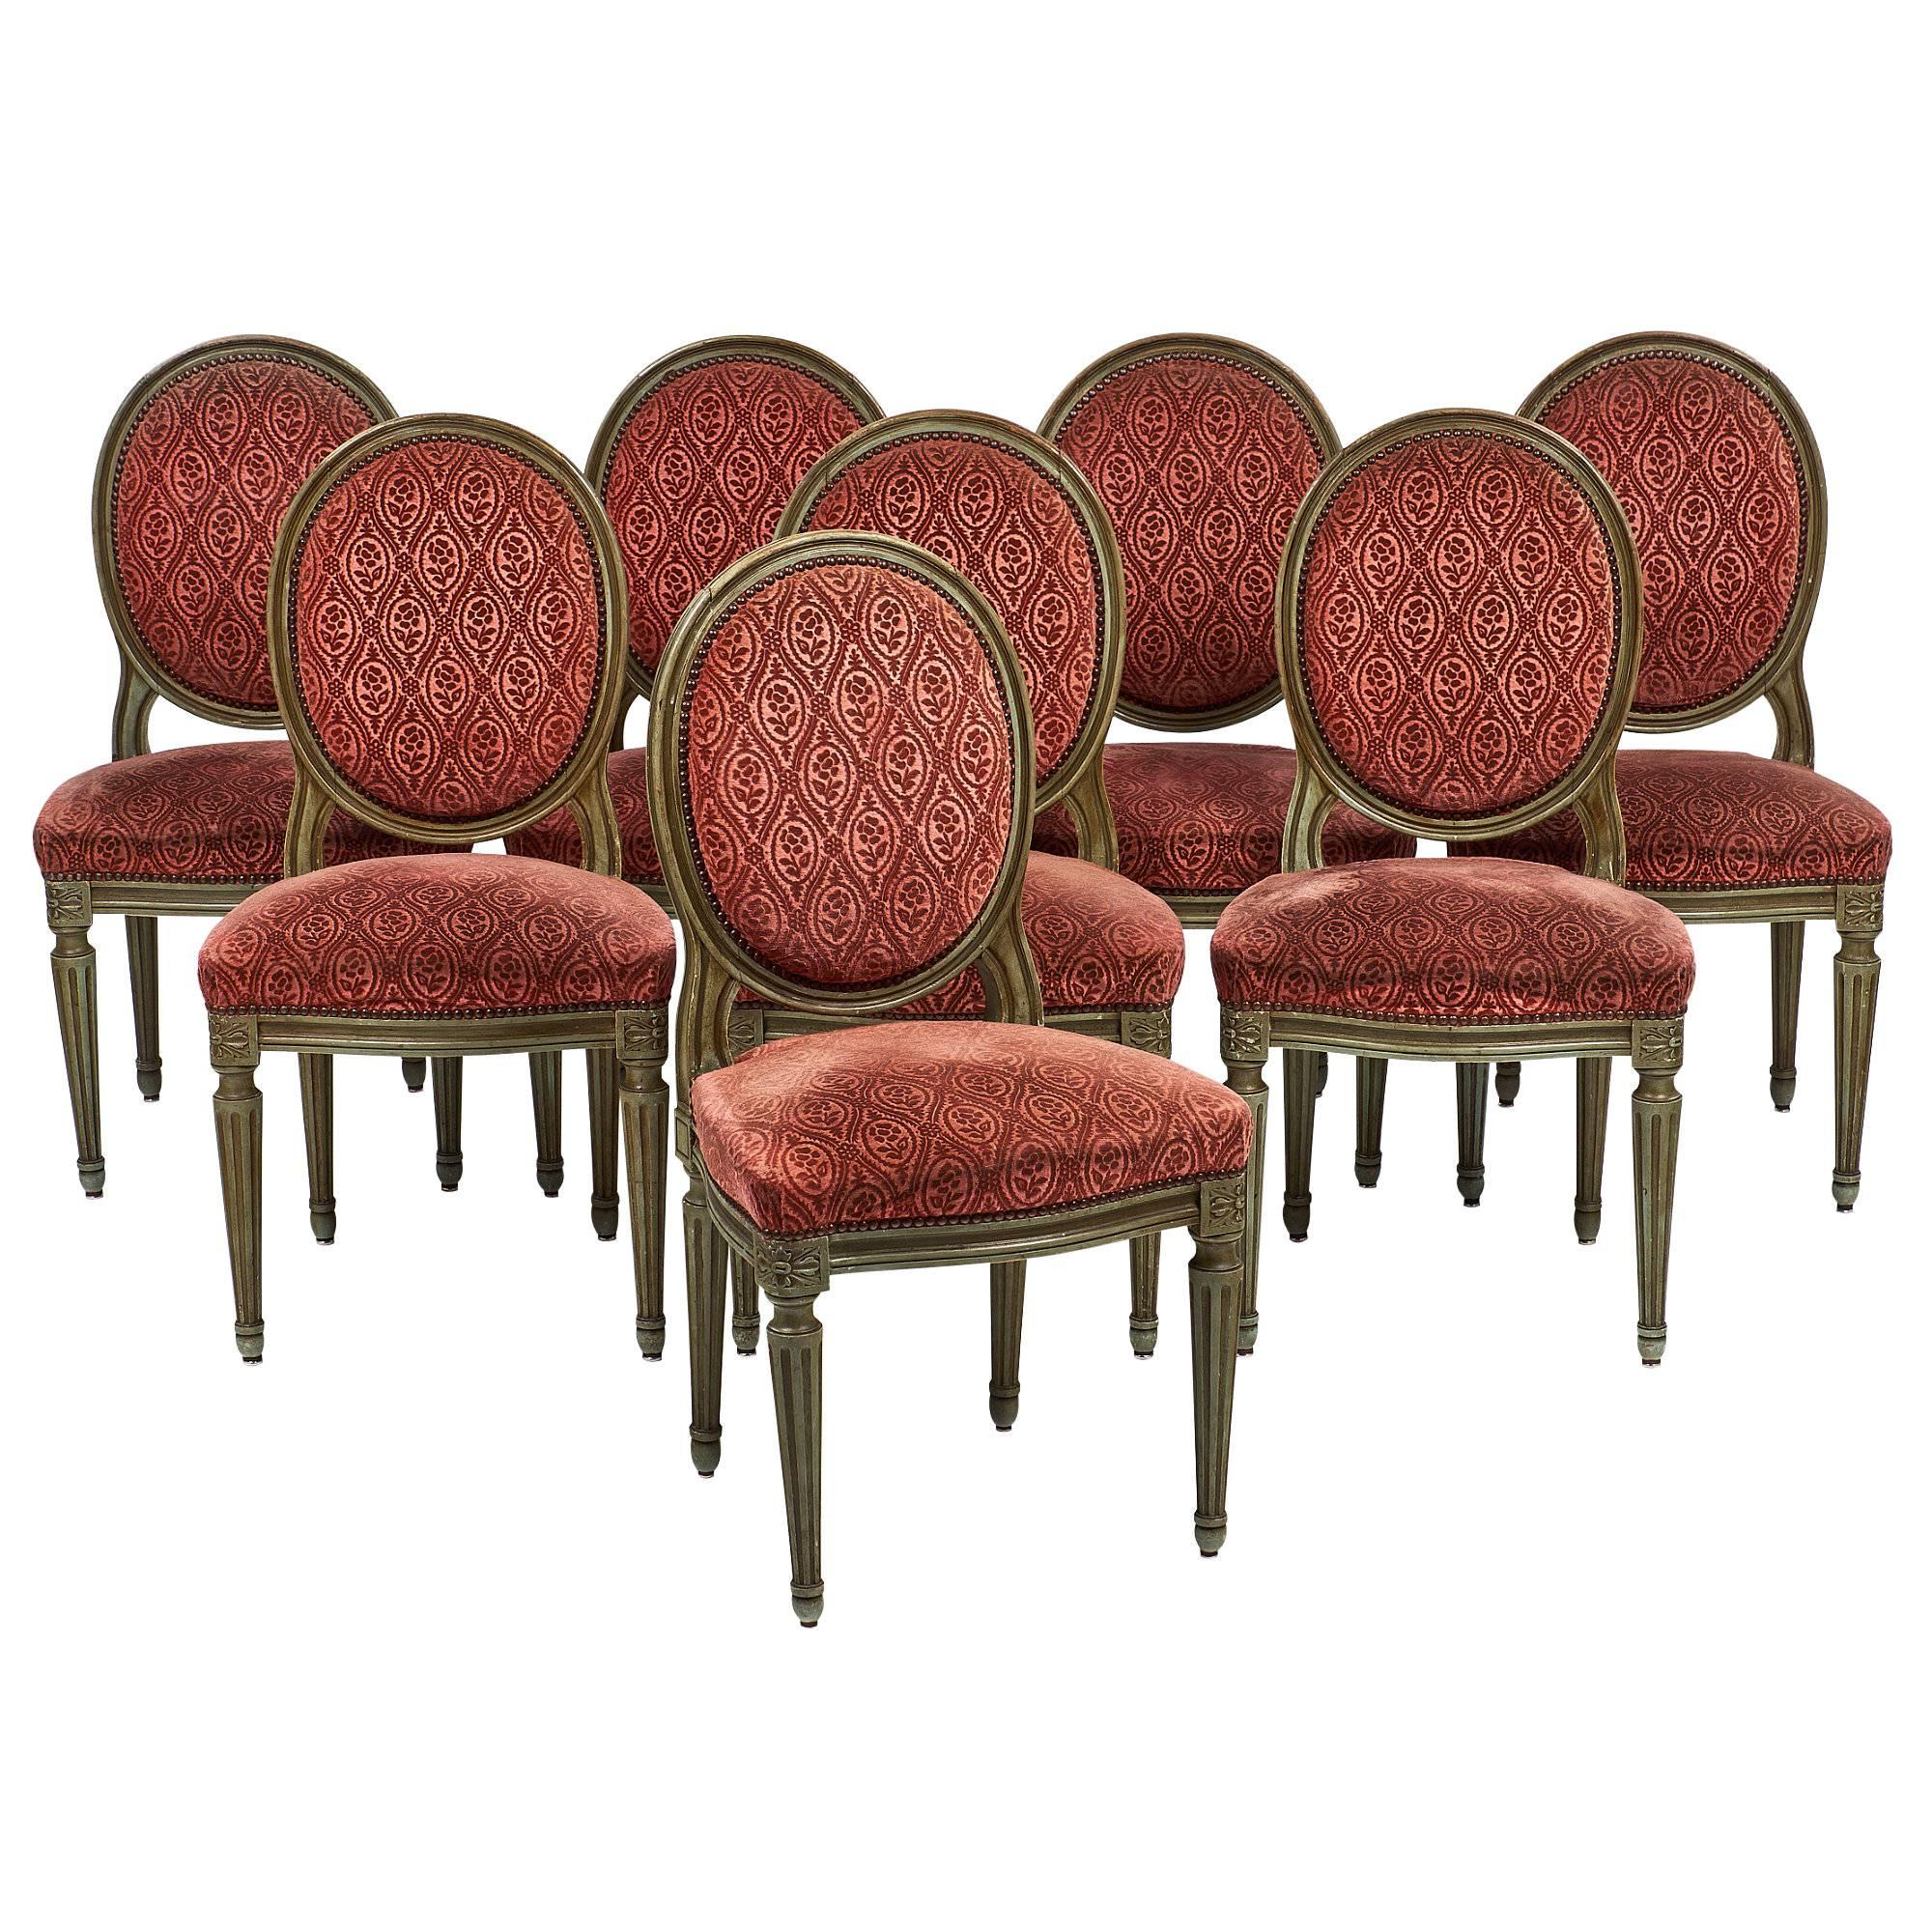 Louis XVI Style Antique French Medallion Back Chairs